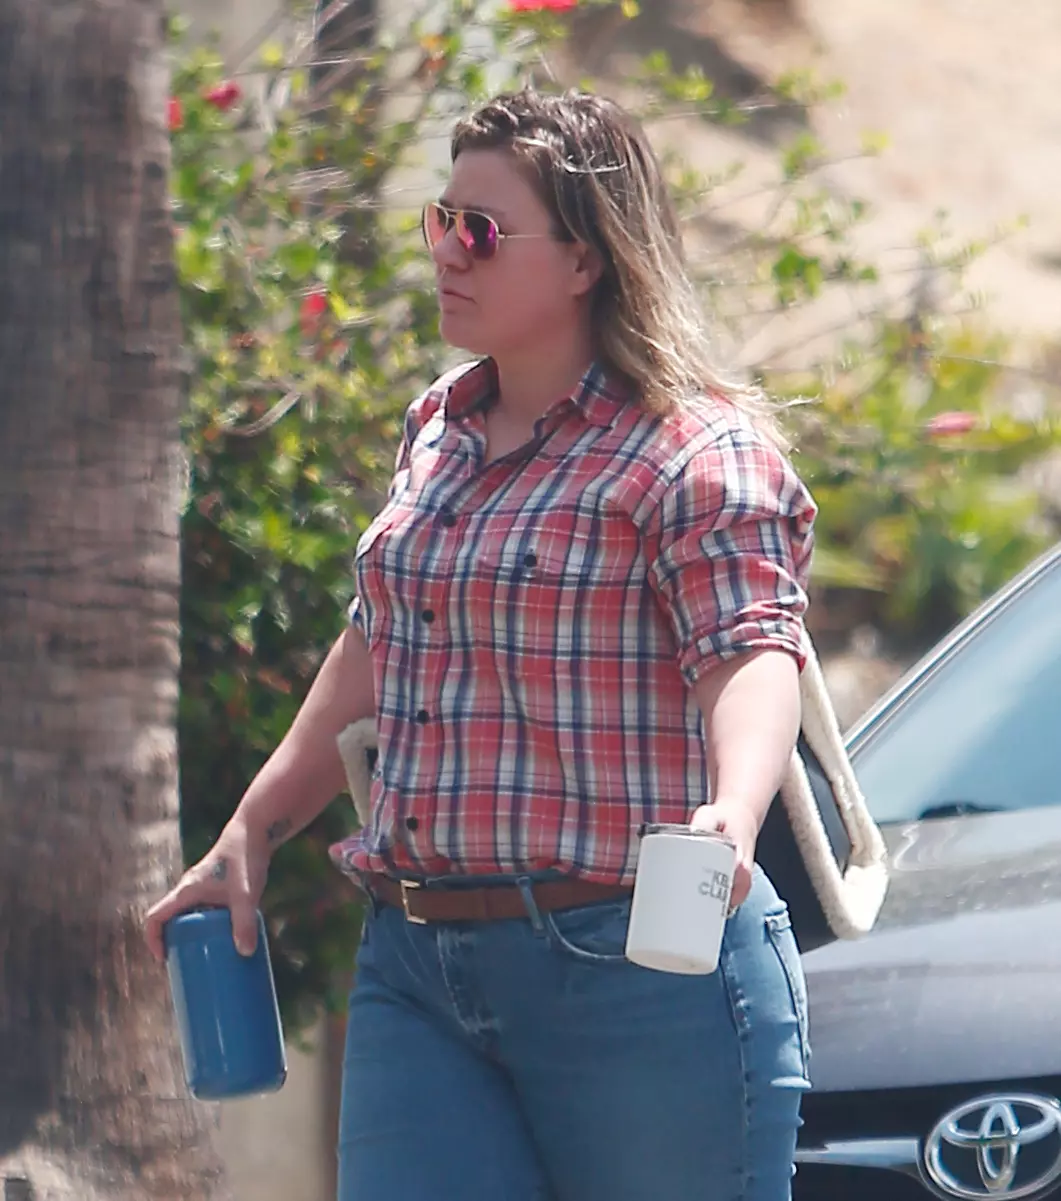 A stony faced Kelly Clarkson puts her divorce and custody drama aside as she heads to an afternoon meeting holding a coffee mug which carried the logo of her popular TV talk show.